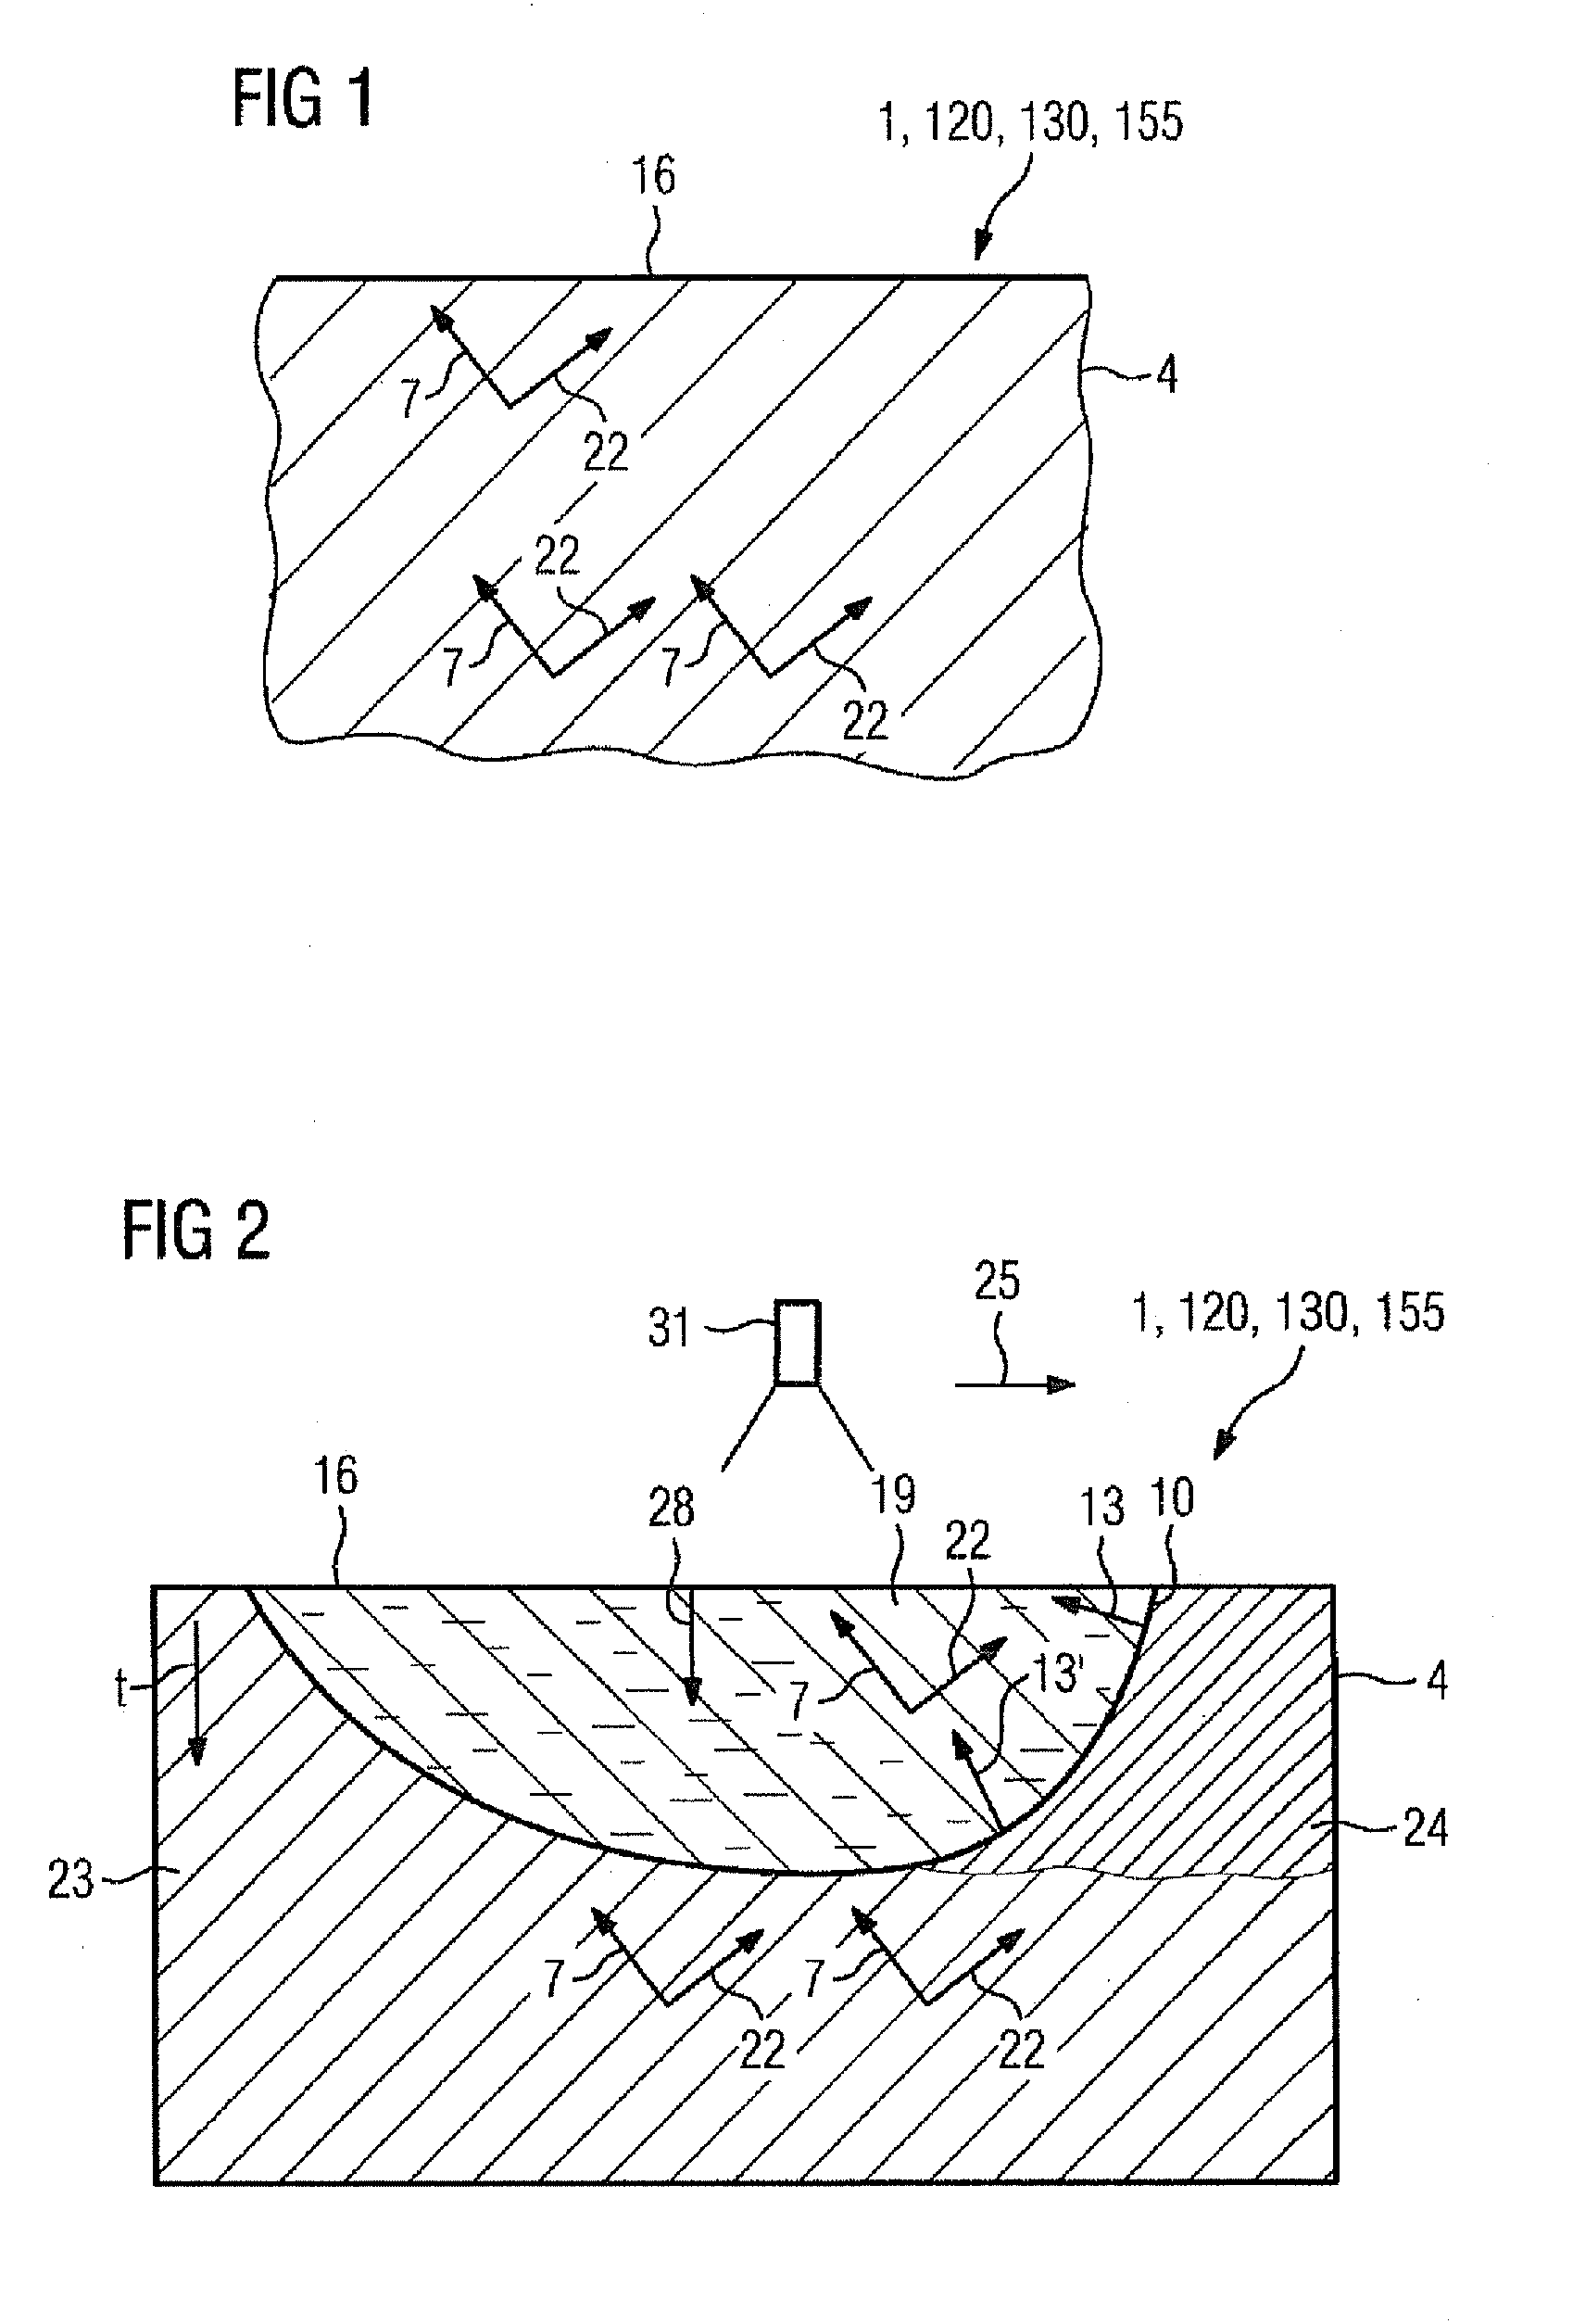 Method for Welding Depending on a Preferred Direction of the Substrate